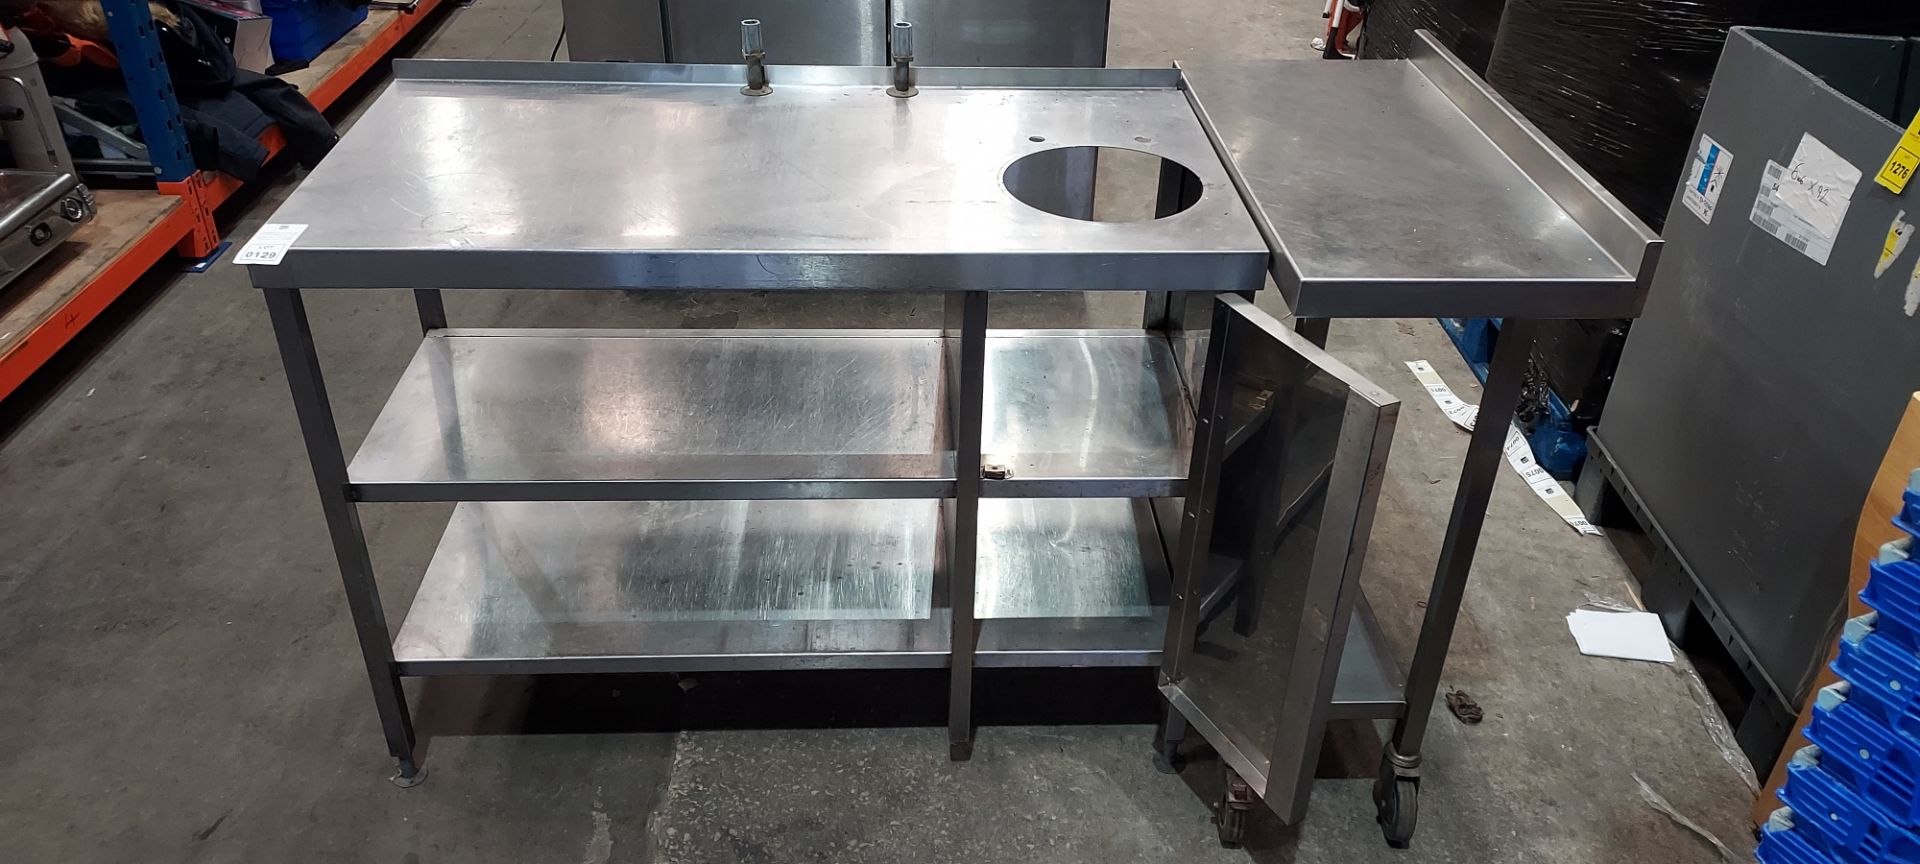 1 X 3 TIER STAINLESS STEEL PREP TABLE WITH BIN HOLE AND 1 DOOR ( 90 CM HEIGHT X 120 CM WIDTH X 60 CM